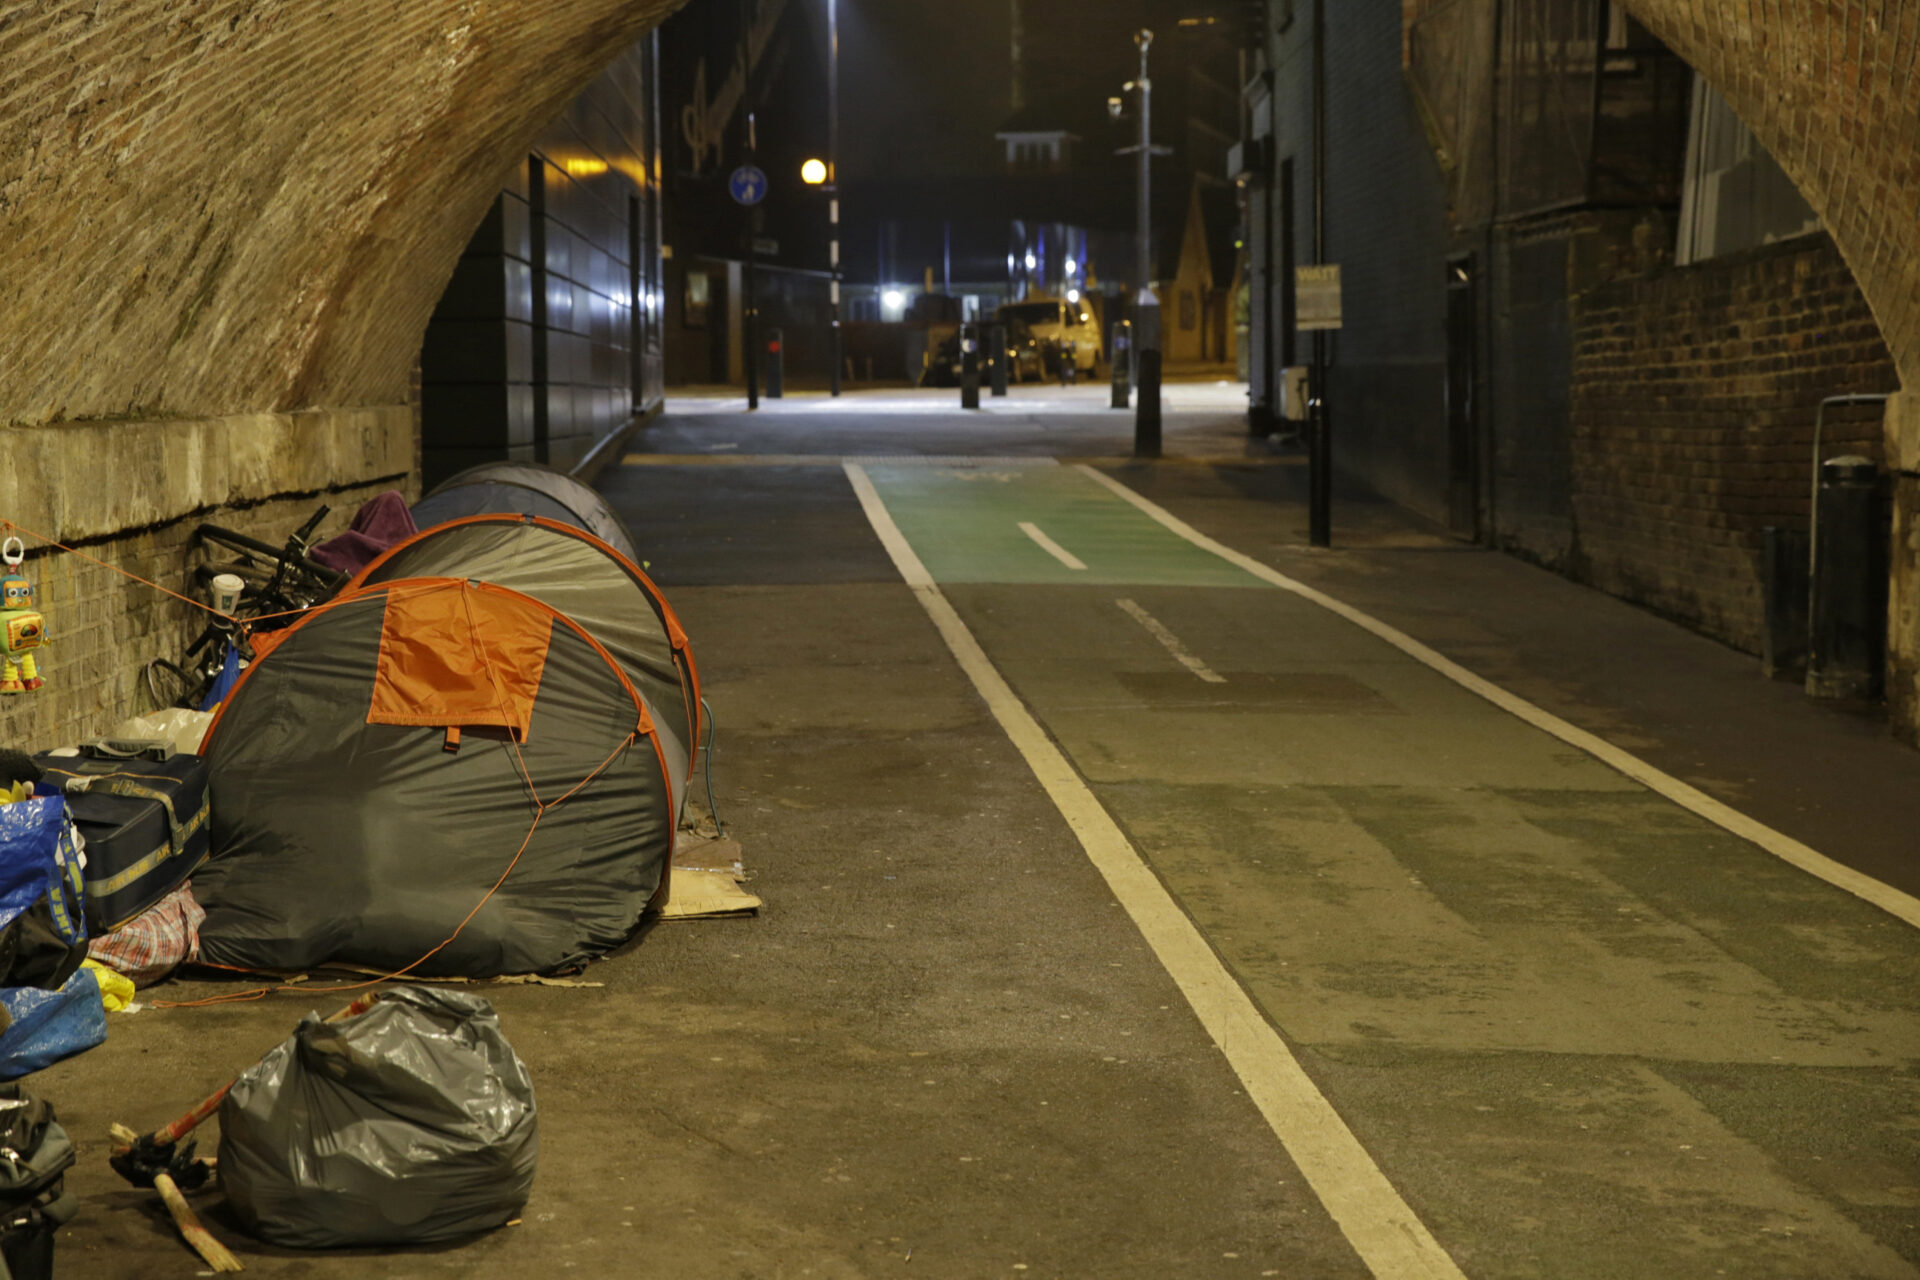 Thames Reach statement on the Home Secretary’s recent comments about rough sleeping